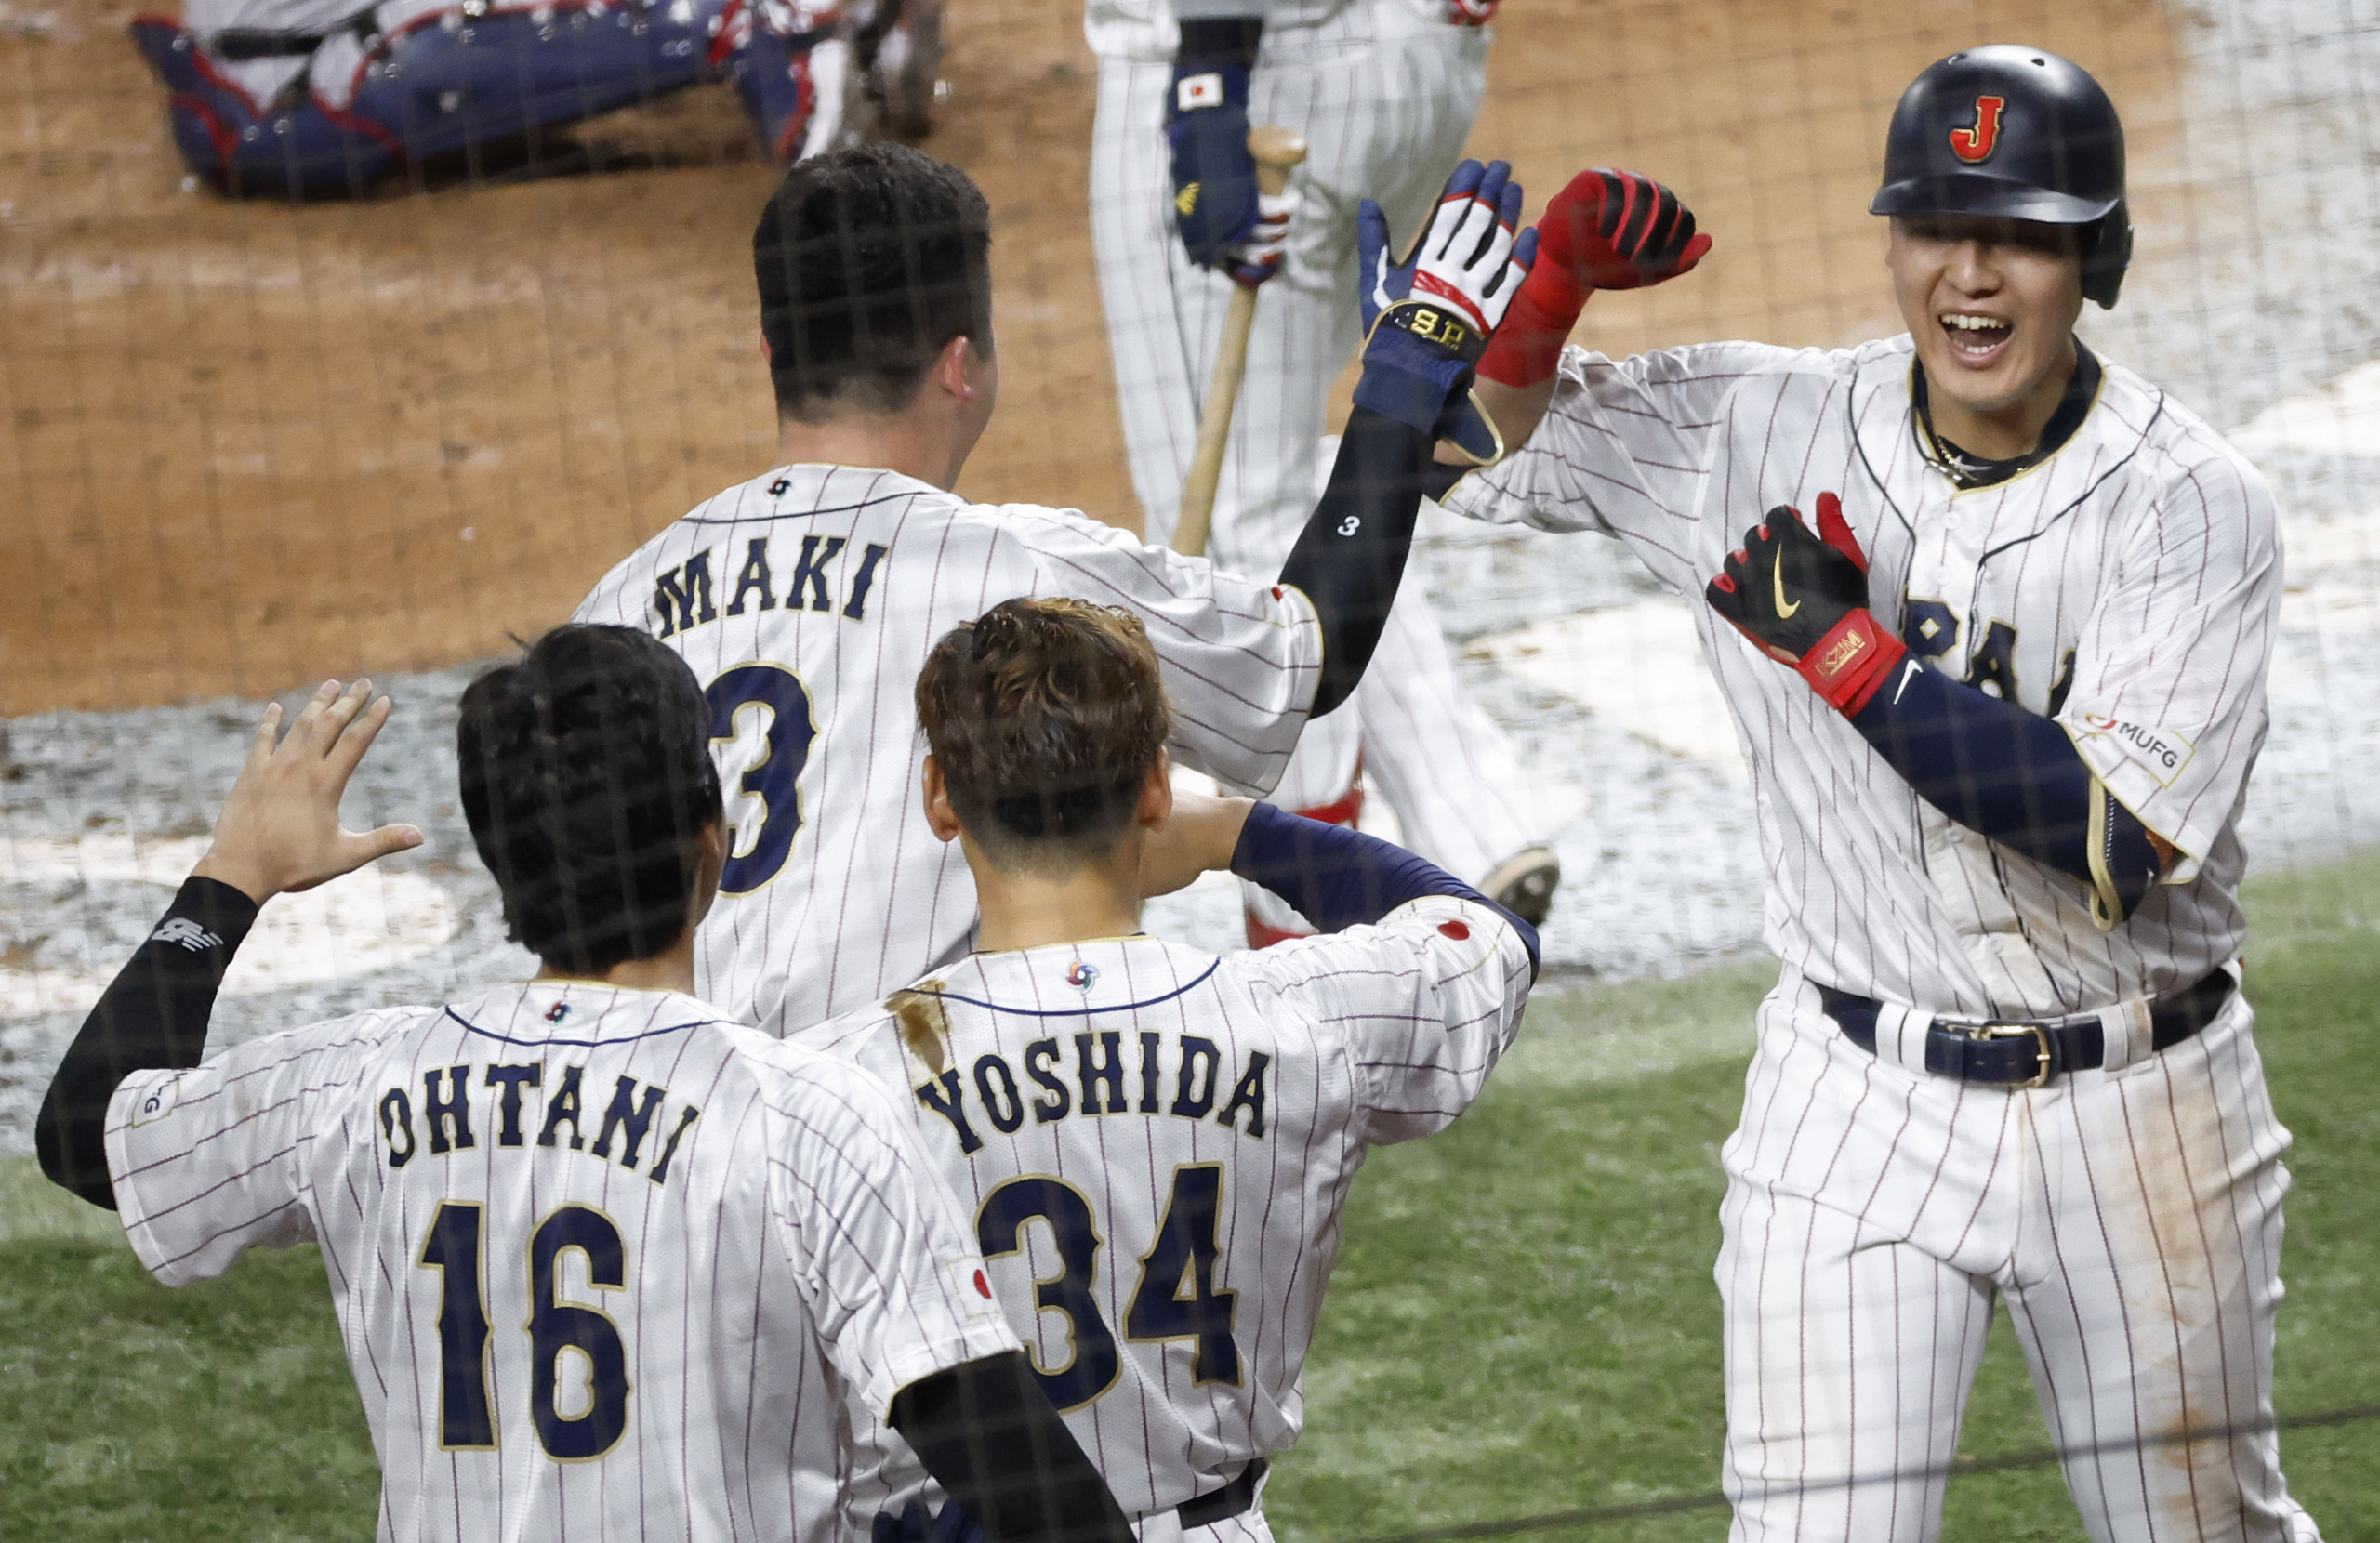 Highlights: Shohei Ohtani leads Japan to dramatic WBC win over United States